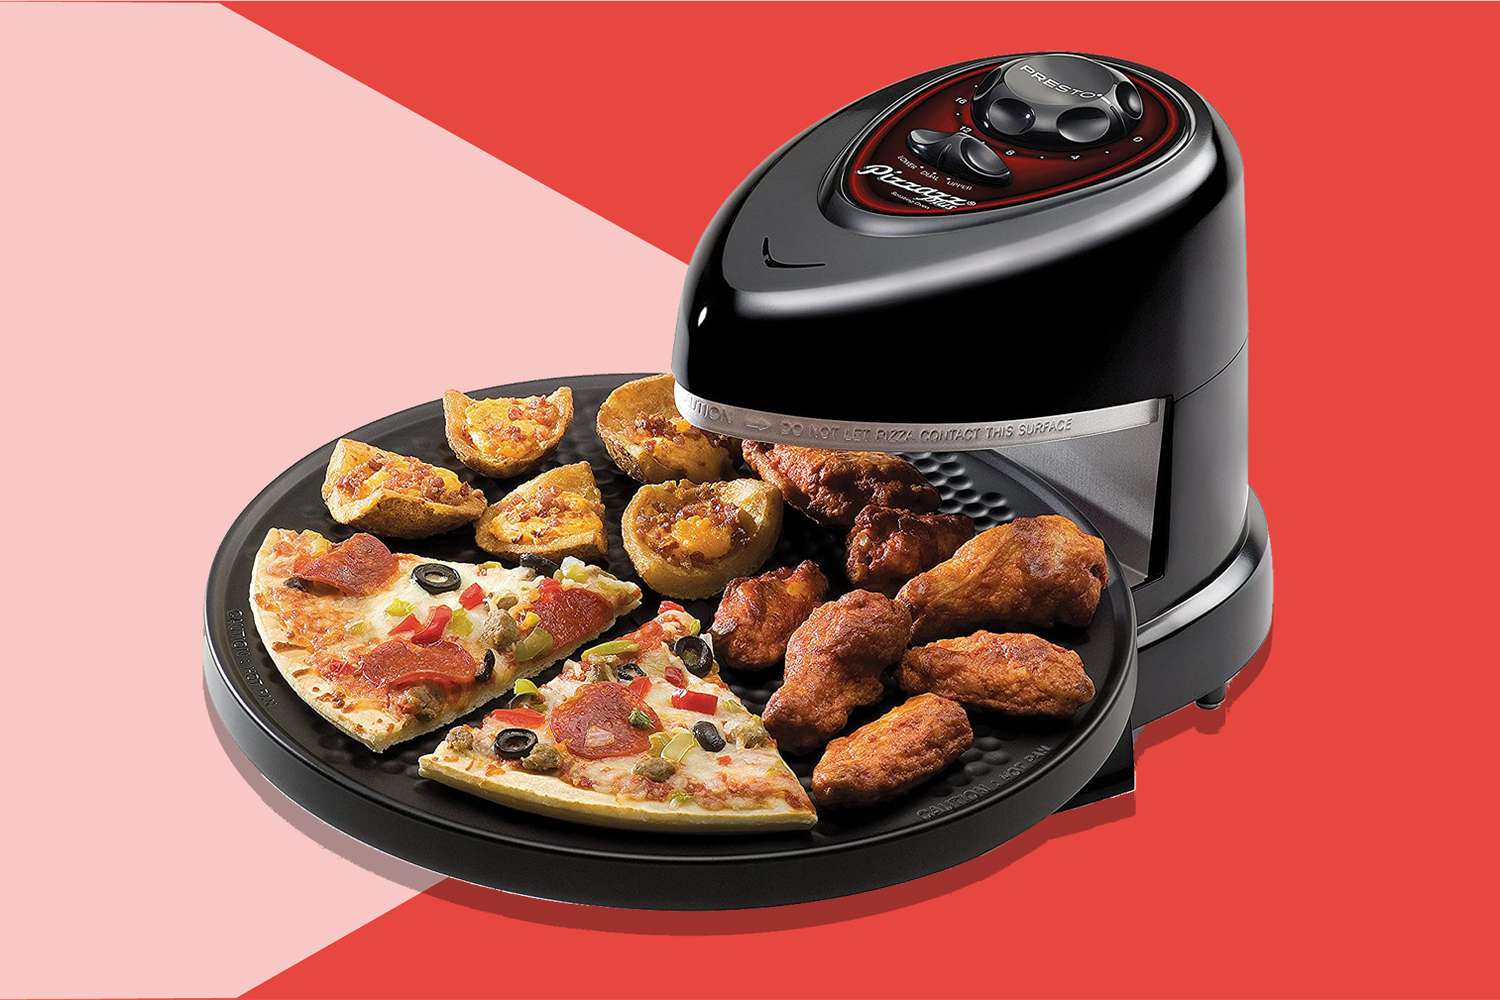 Shoppers Prefer the Presto Pizzazz Rotating Oven Over Air Fryers